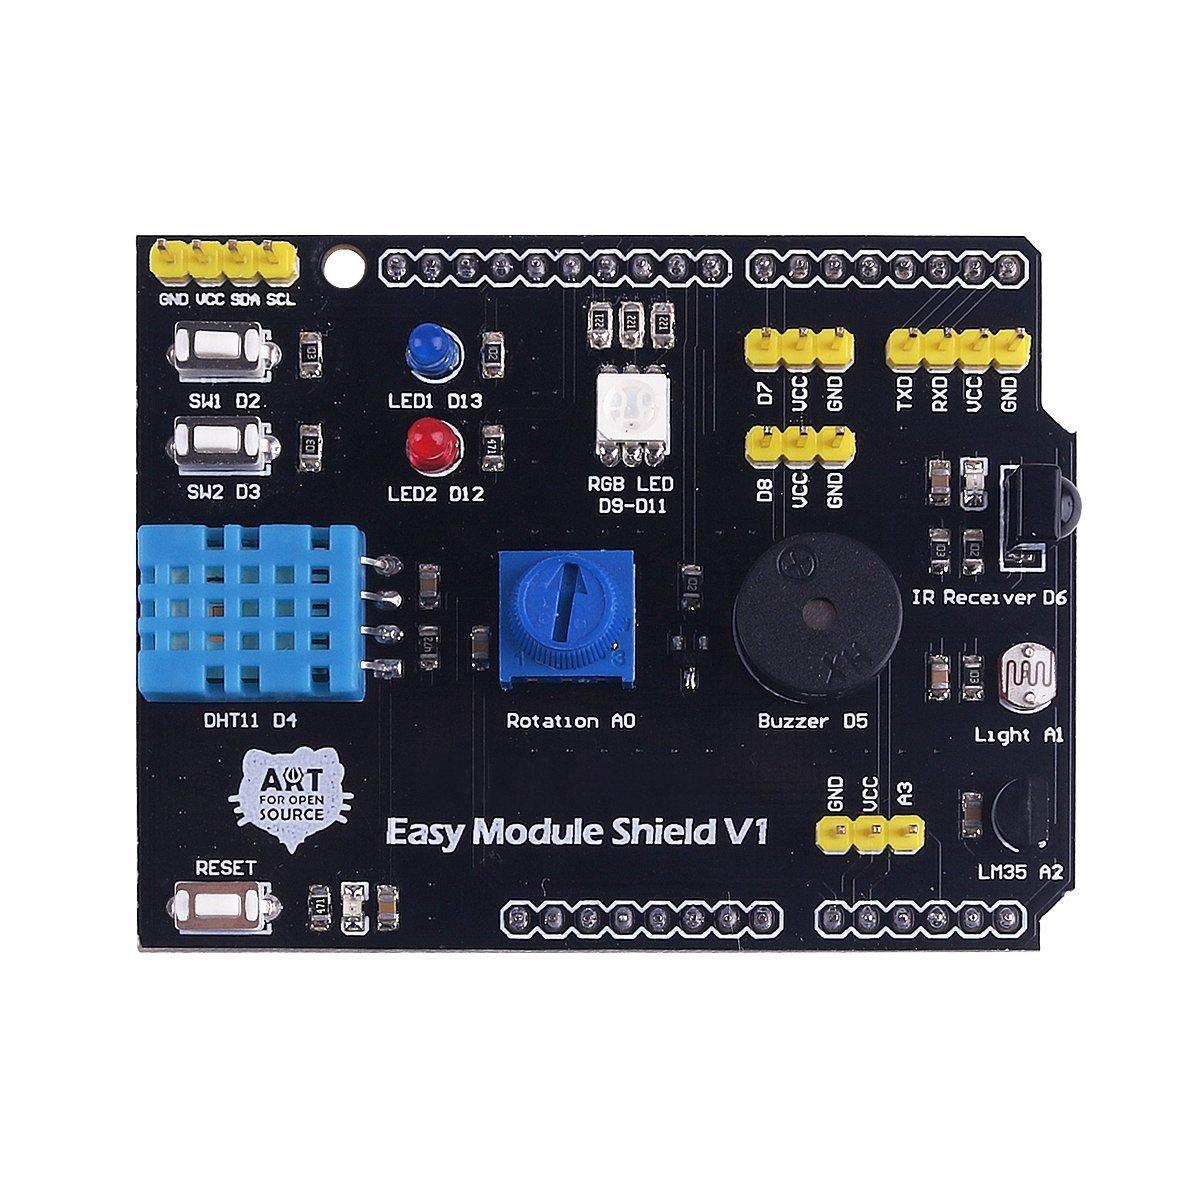 Multifunction Extension Board DHT11 LM35 Temperature Humidity For Arduino UNO R3